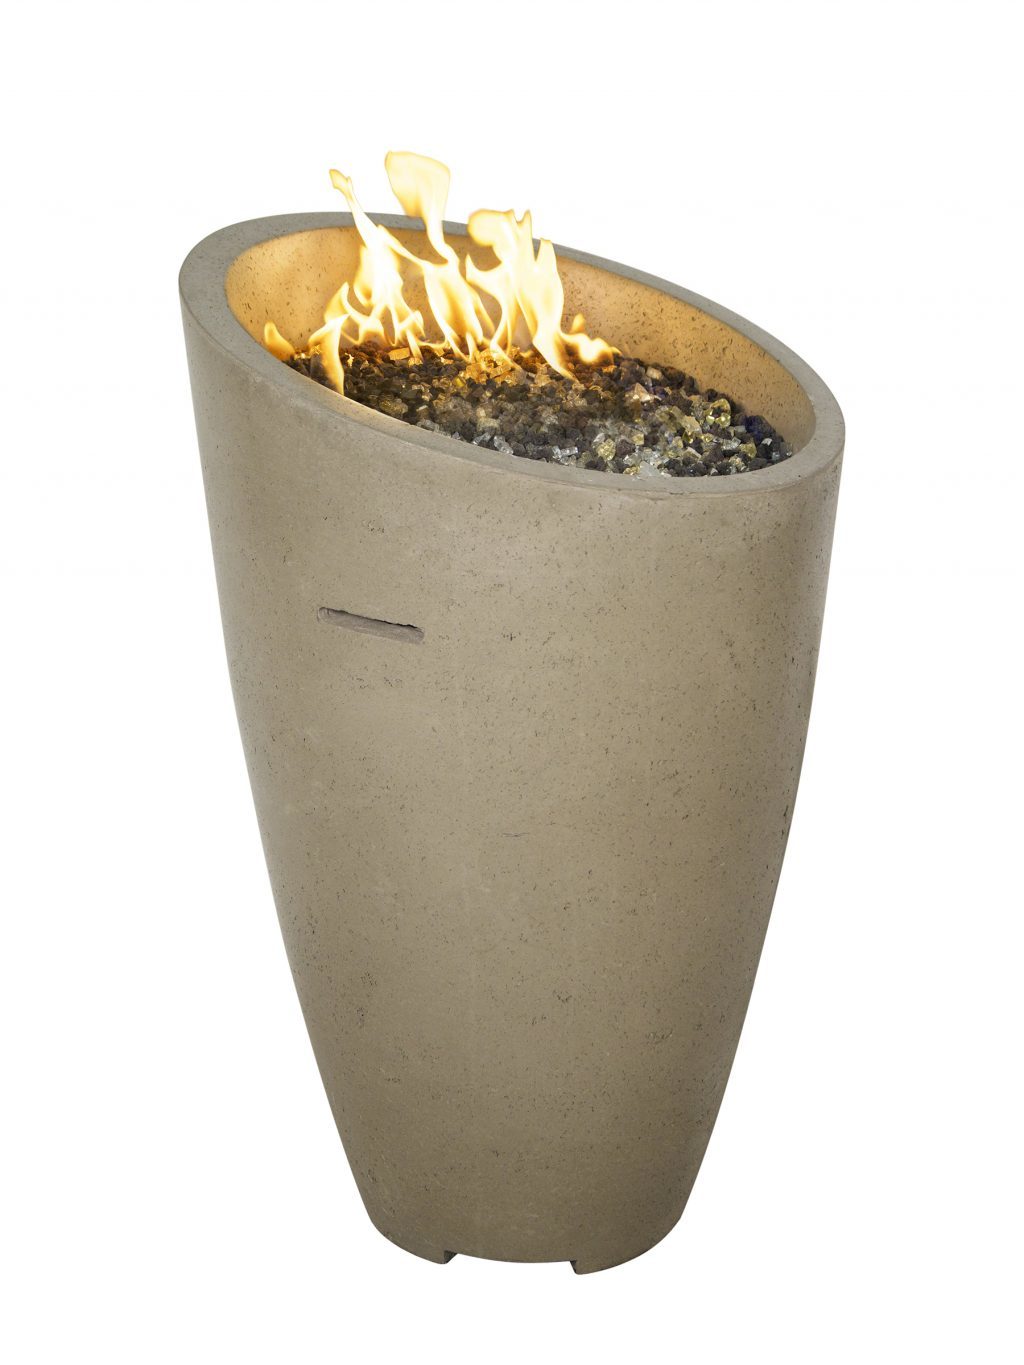 Eclipse fire urn - Hausers Patio